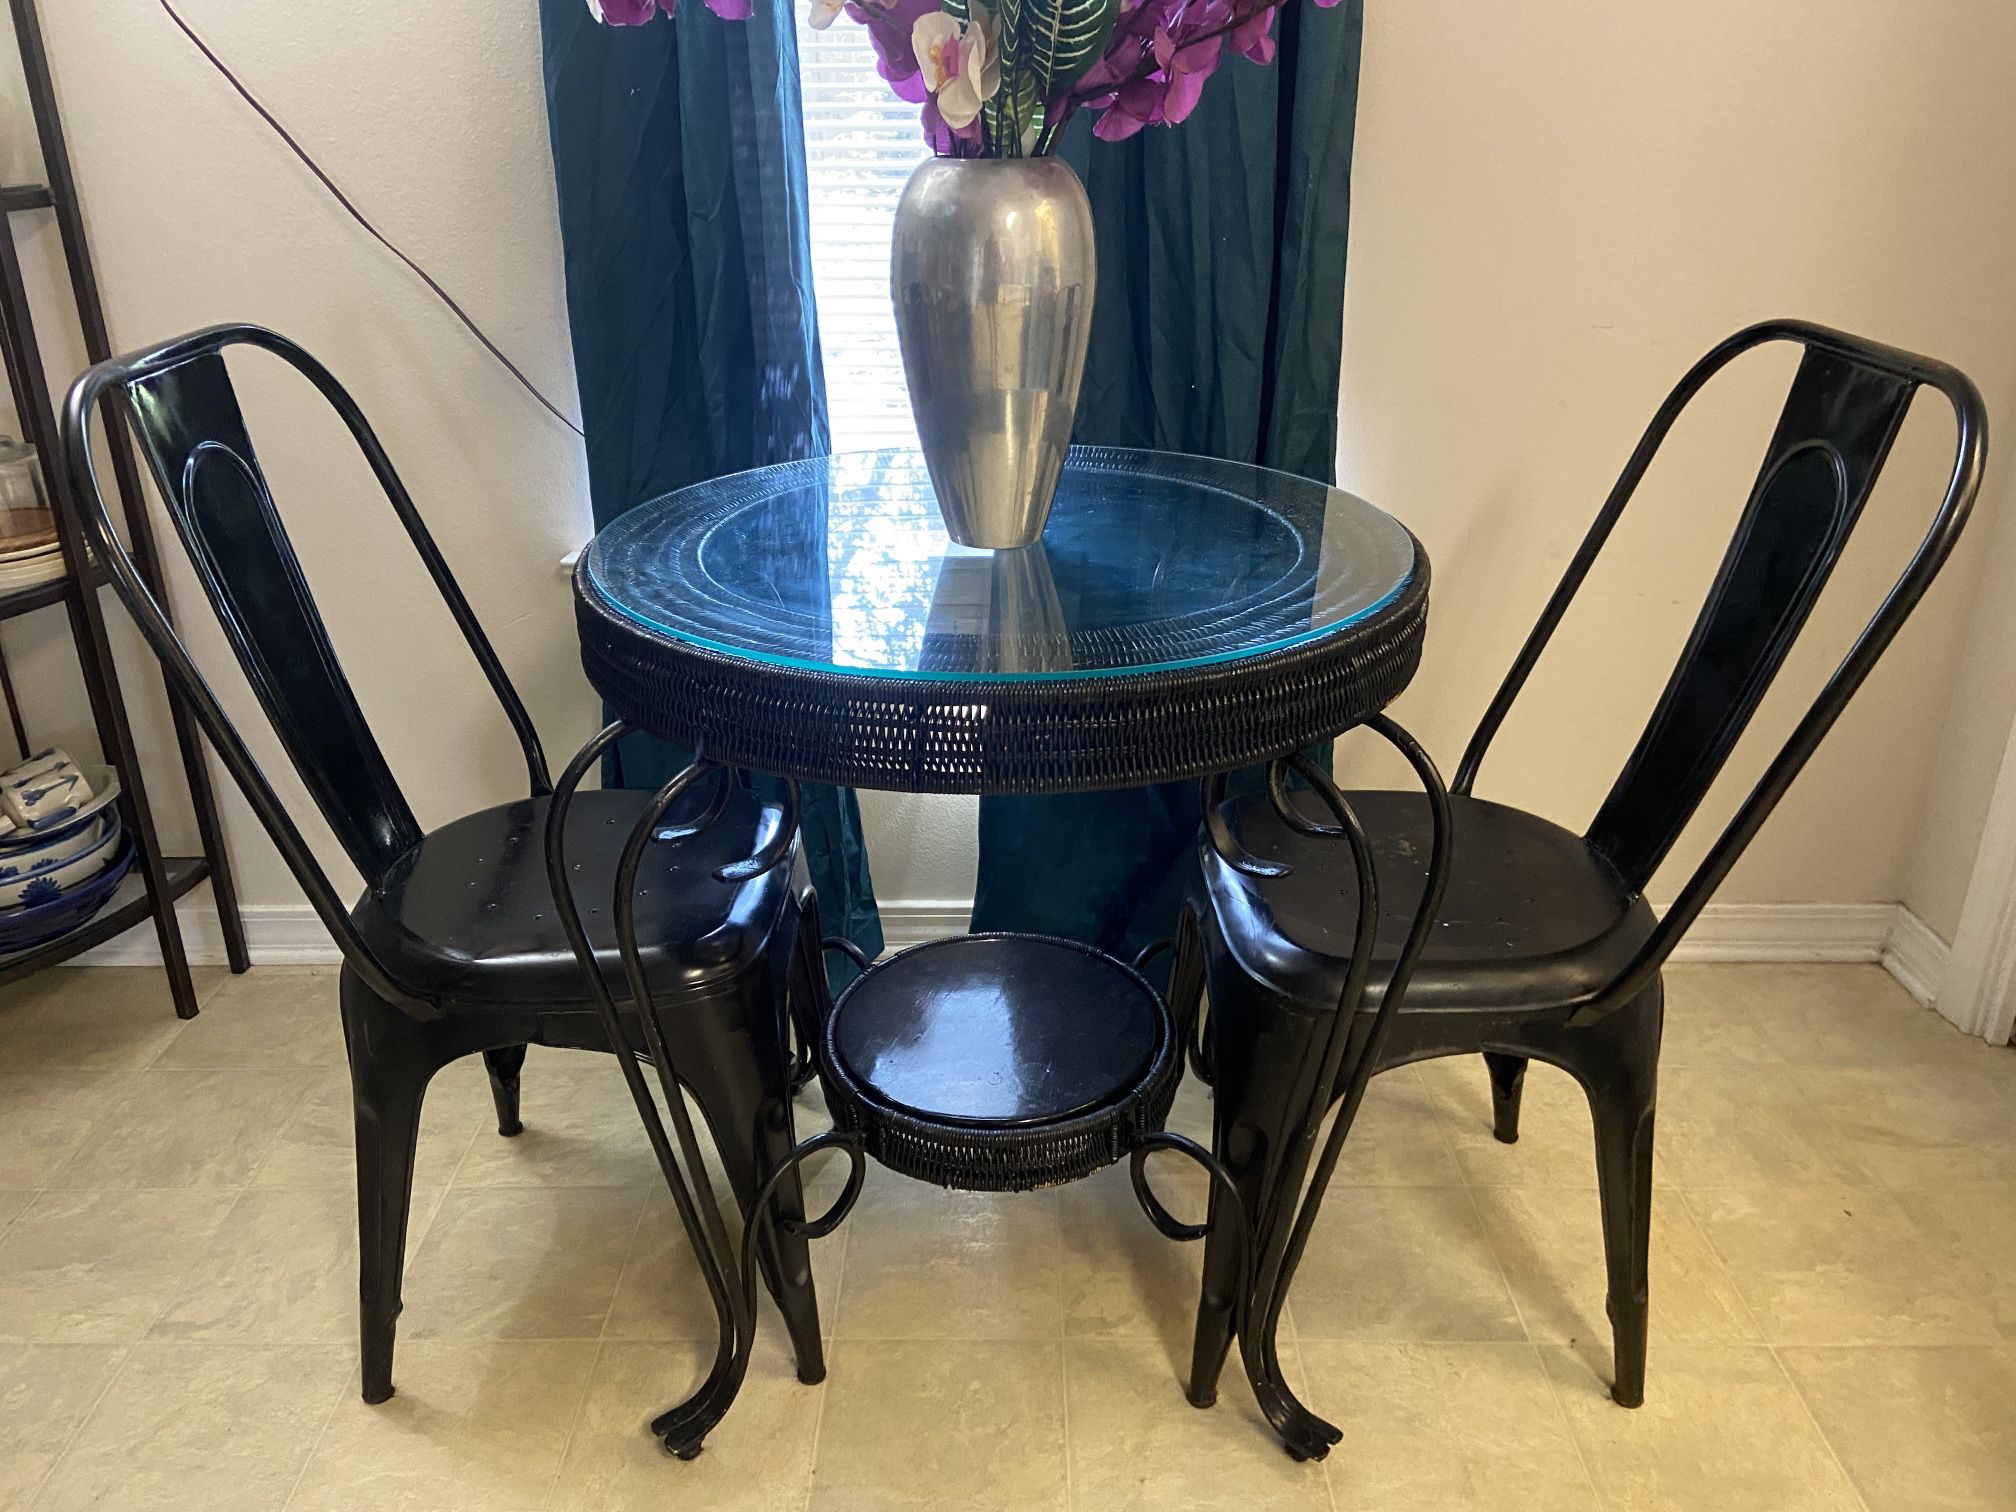 Small Black Wrought Iron And Wicker Dining Table And 2 Chairs In Excellent Condition